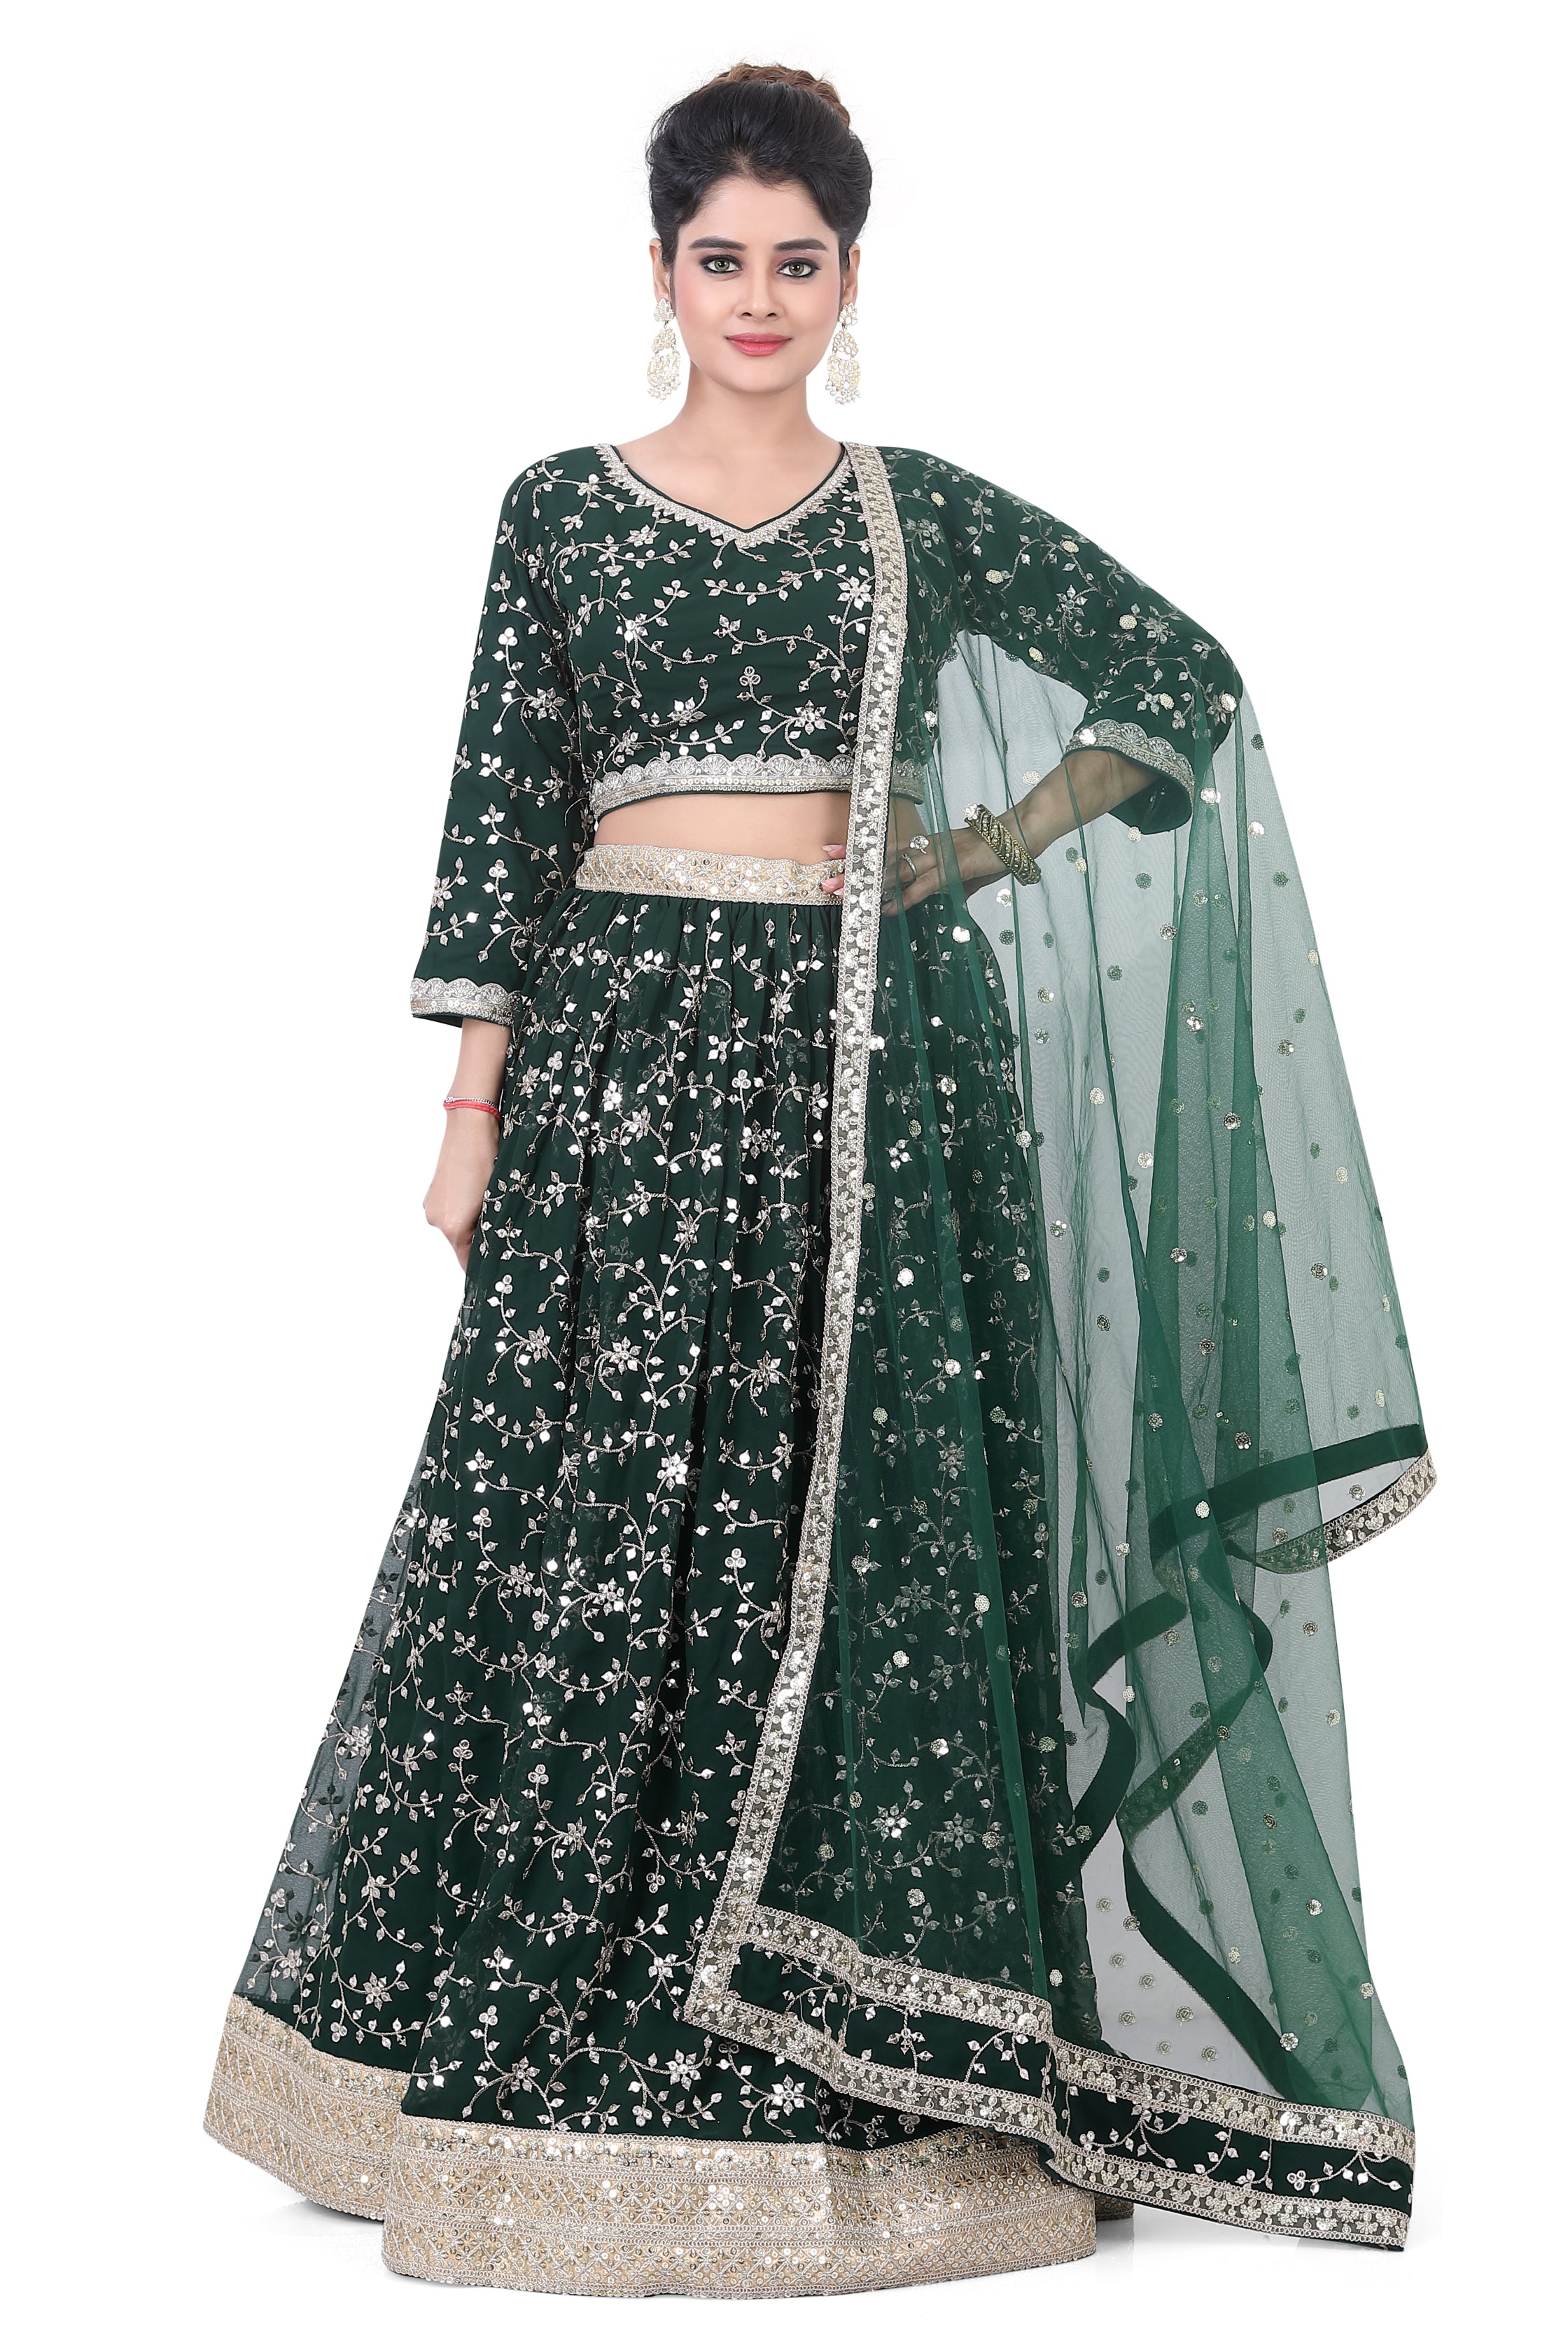 Bottle Green Georgette Partywear Embroidered Lehenga Choli with sequin work-LC3046